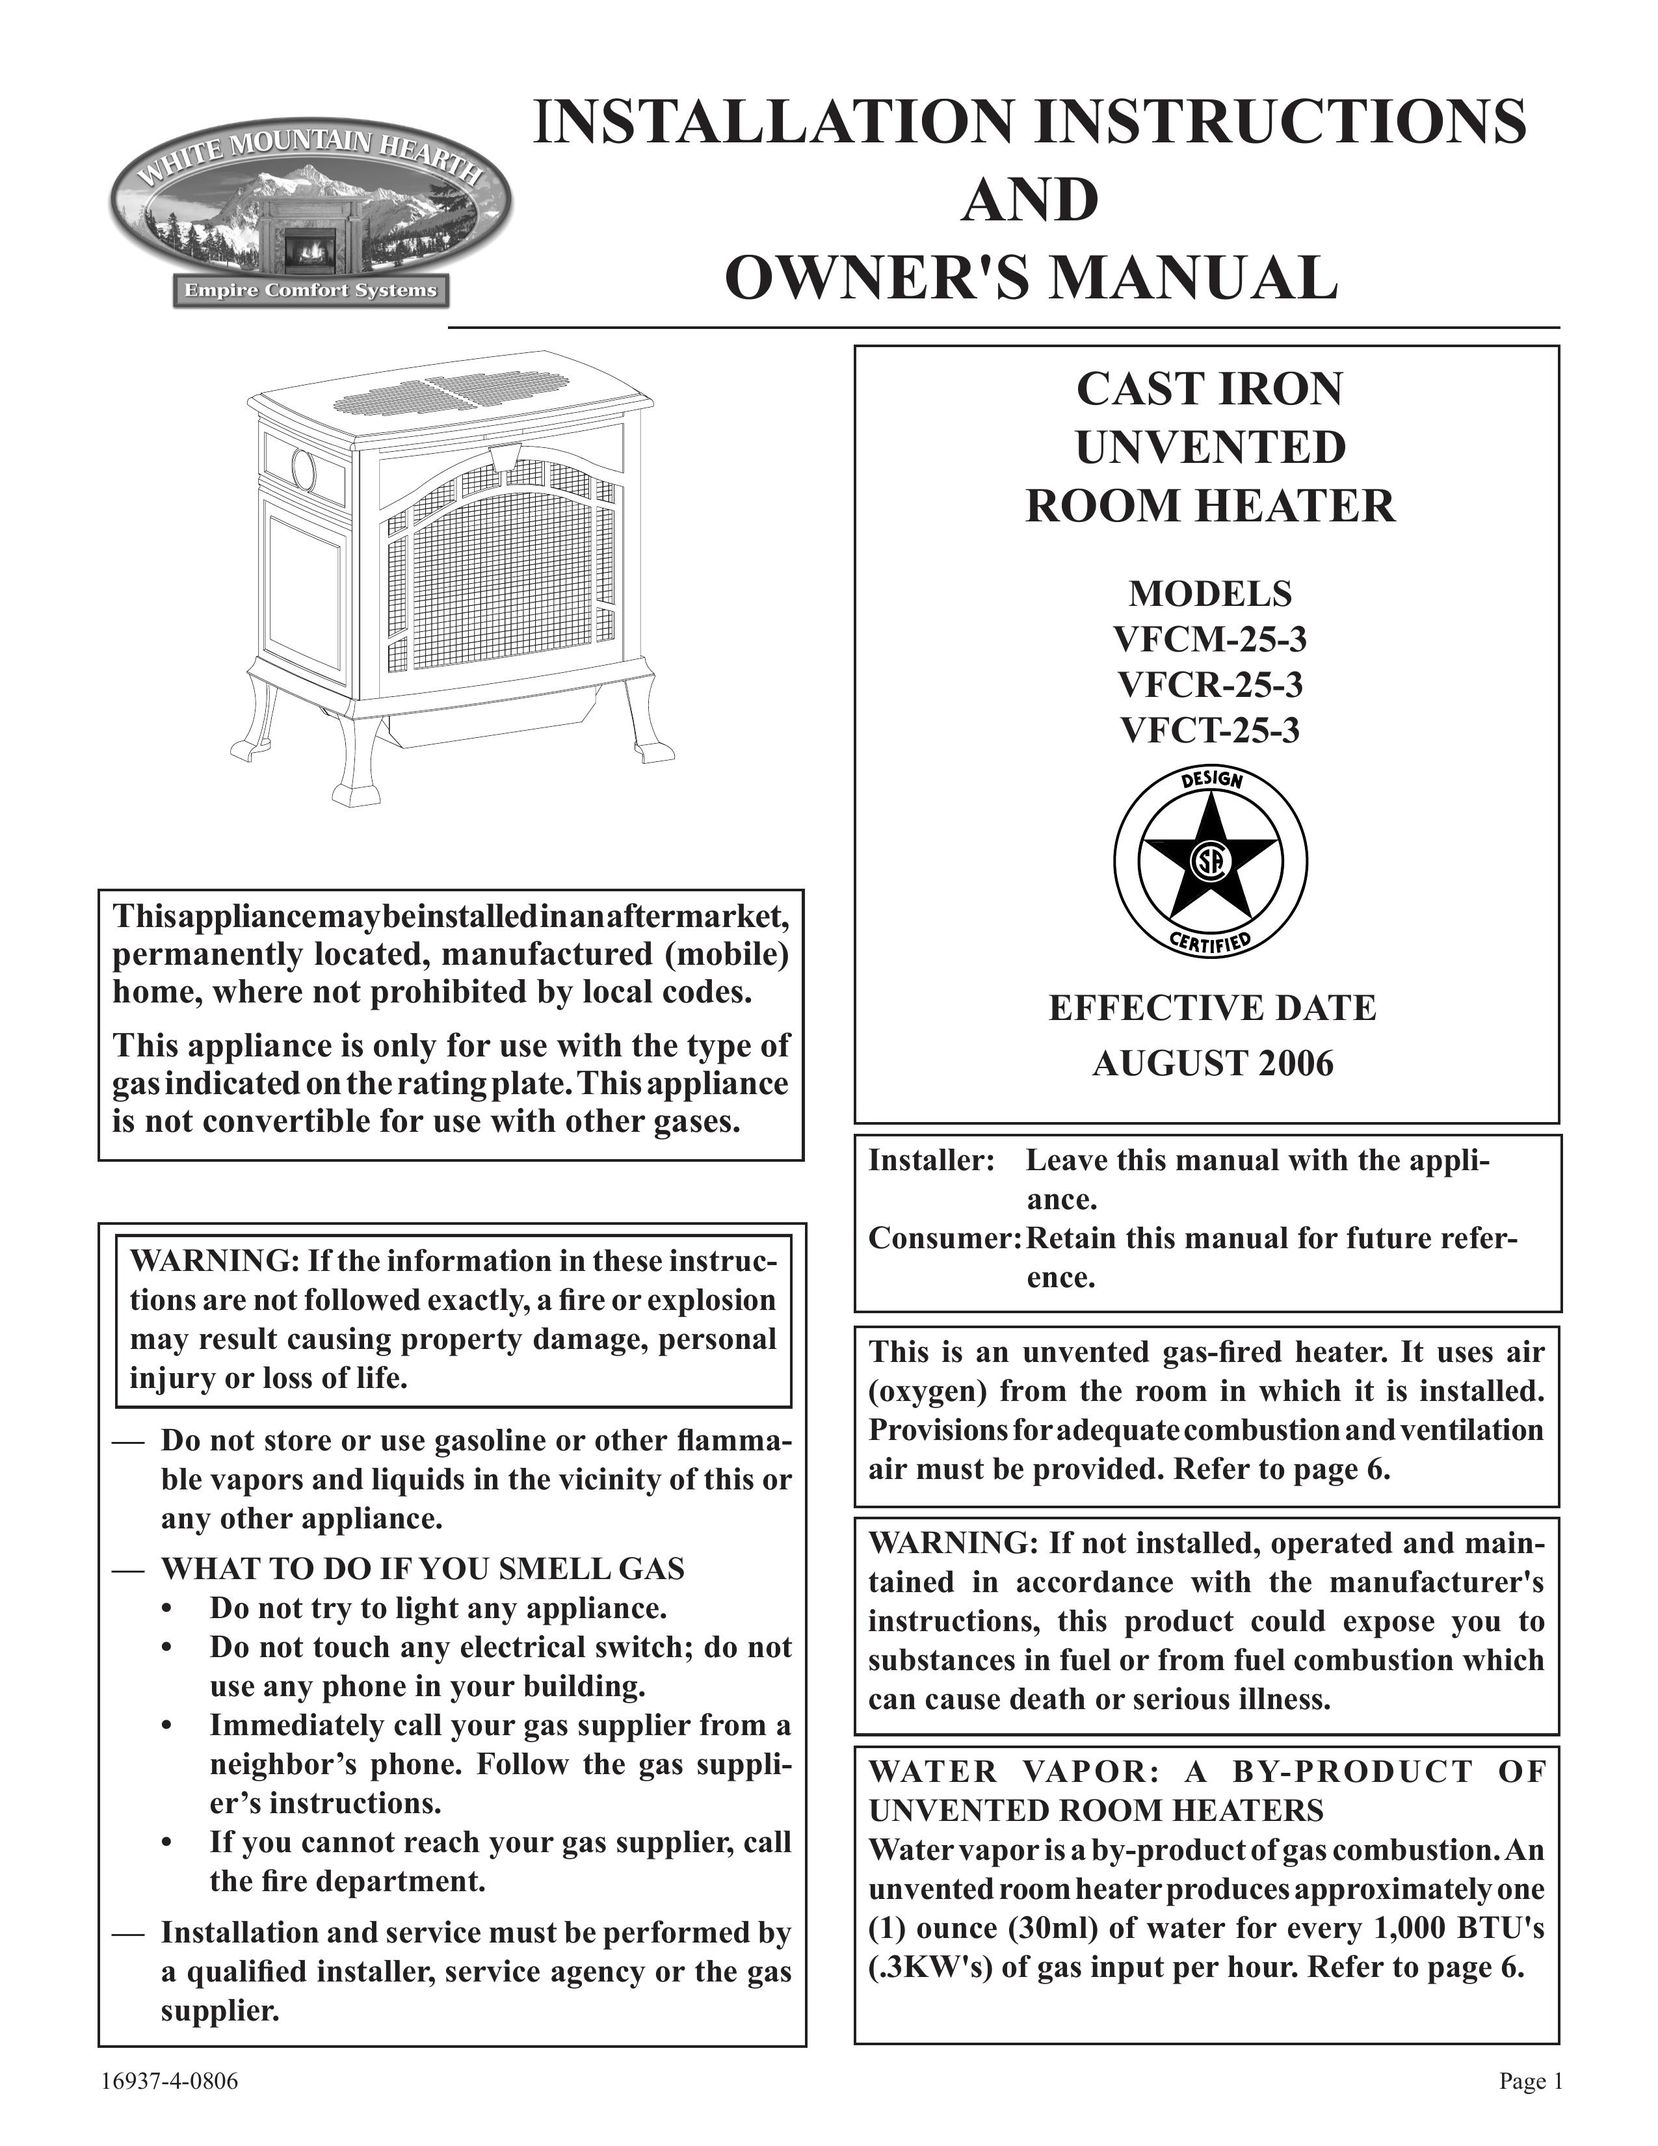 Empire Comfort Systems VFCT25-3 Electric Heater User Manual